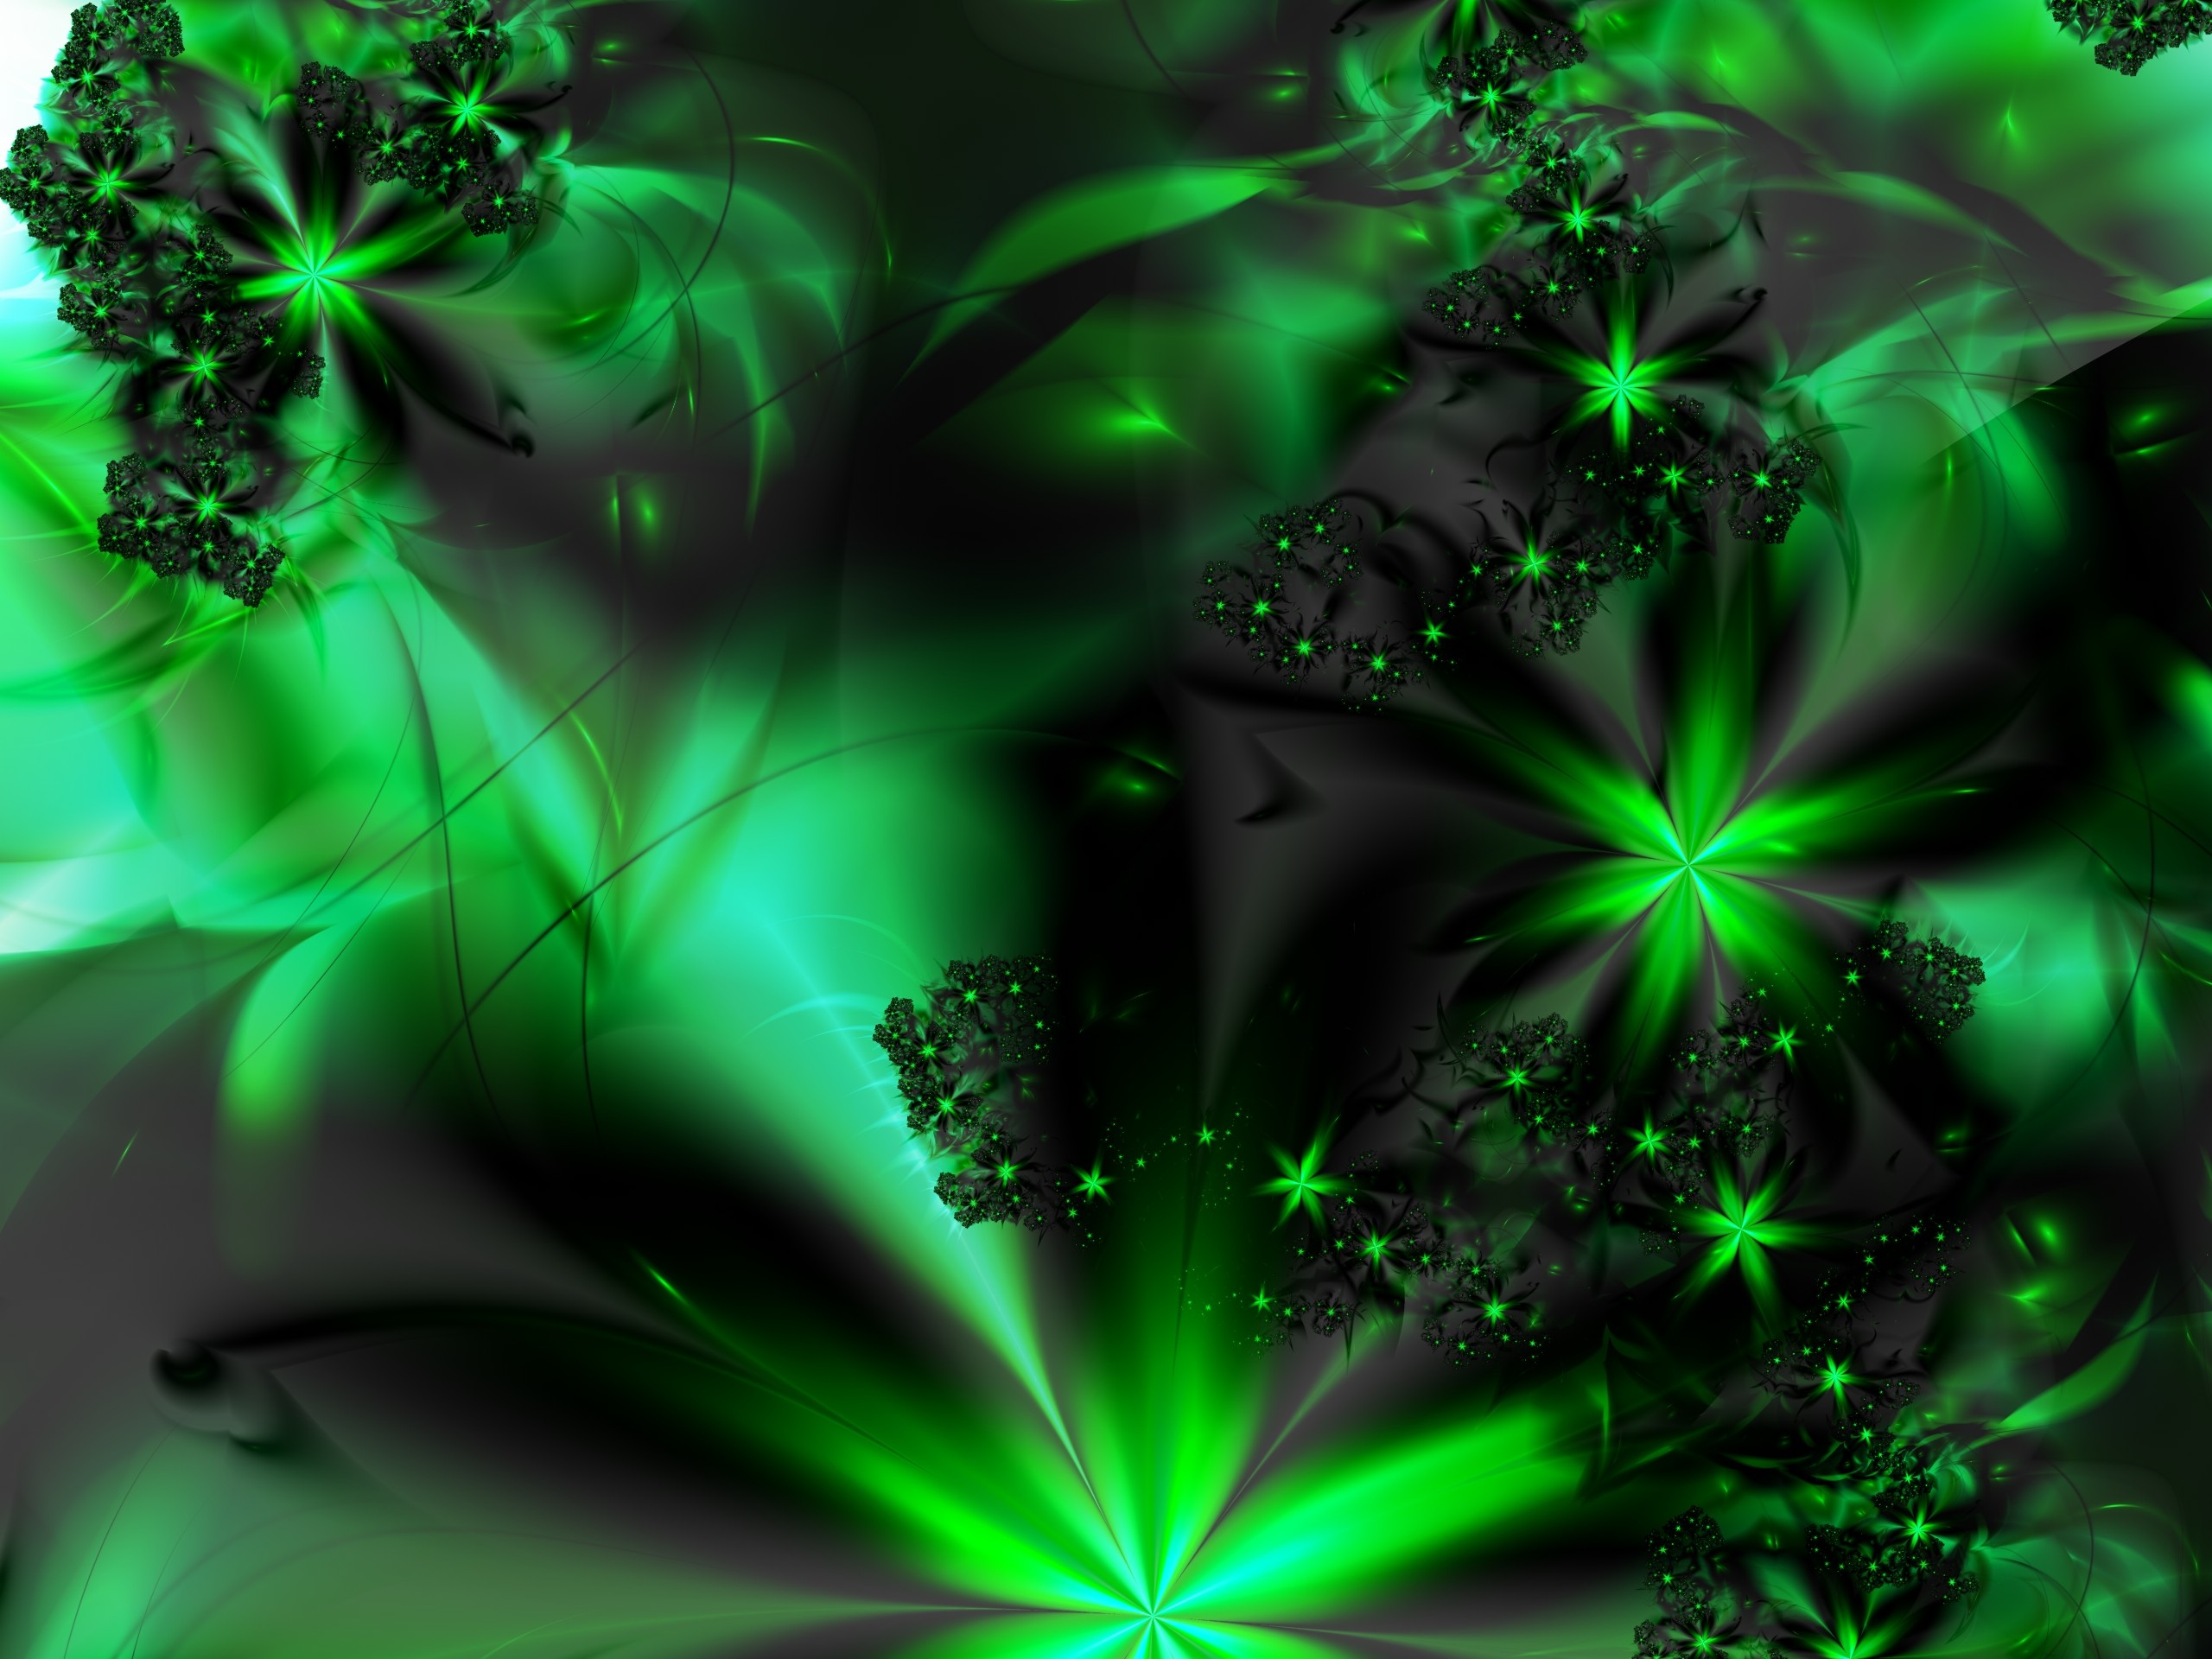 2560x1920 Image: Bright Emerald wallpapers and stock photos